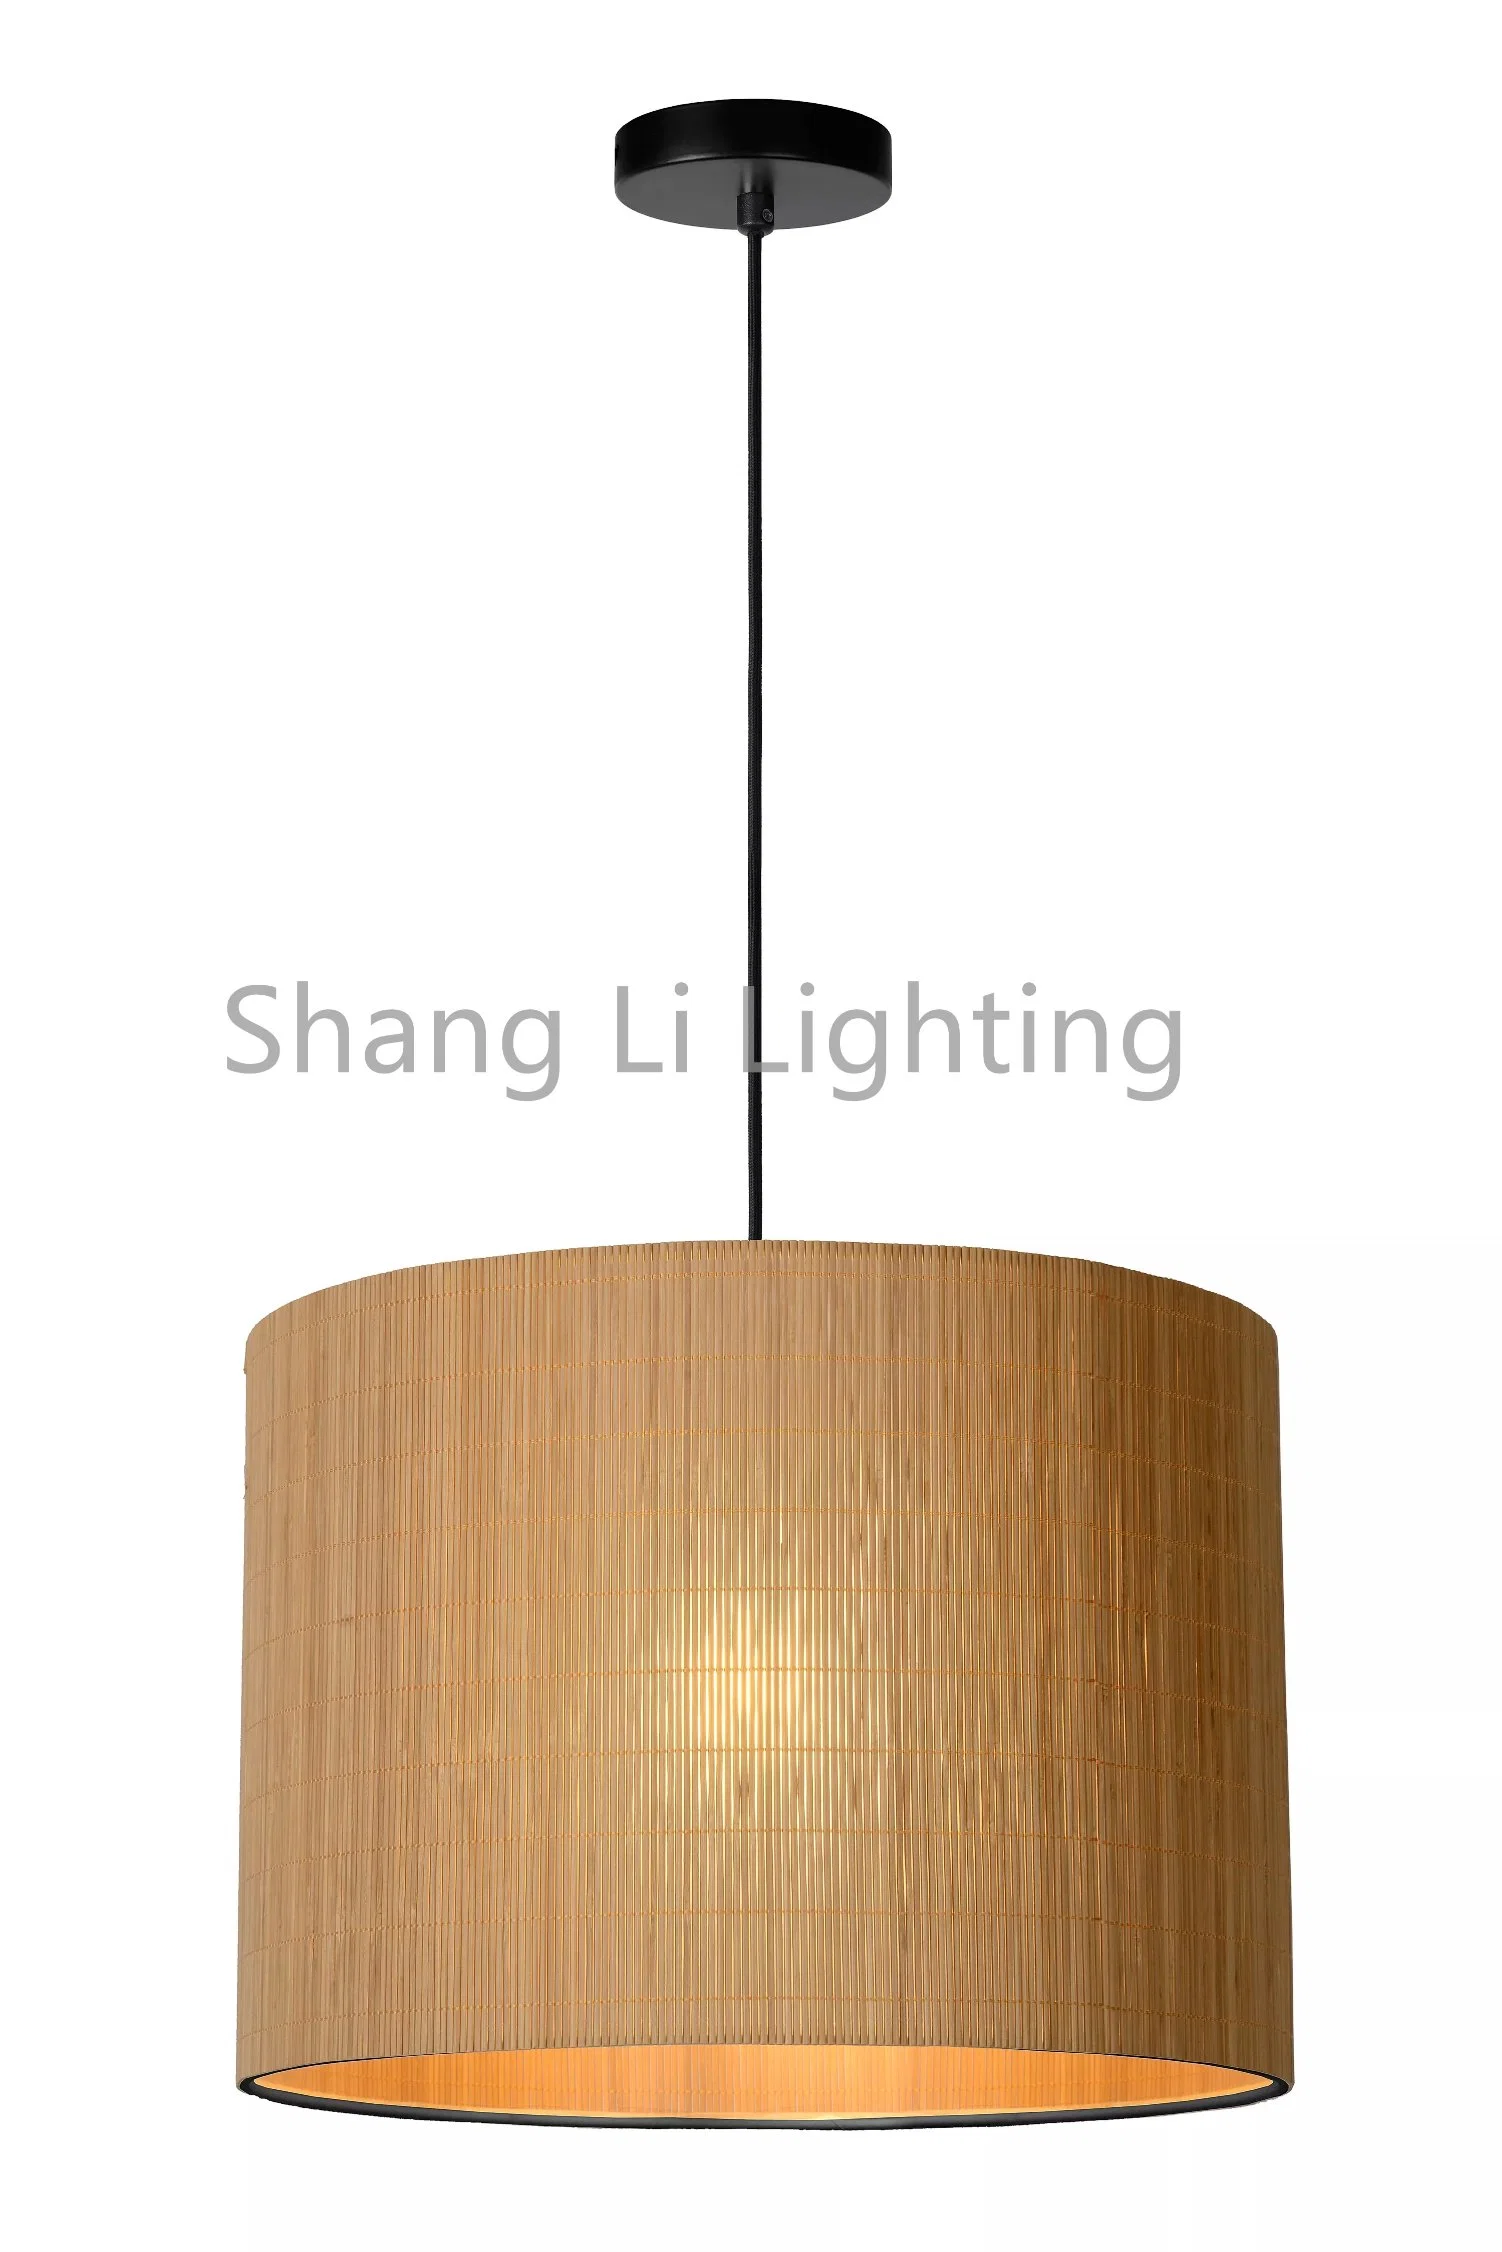 Farmhouse Bamboo Lamp Shade Pendant Light Kitchen Natural Lamps Home Decor for House Rooms